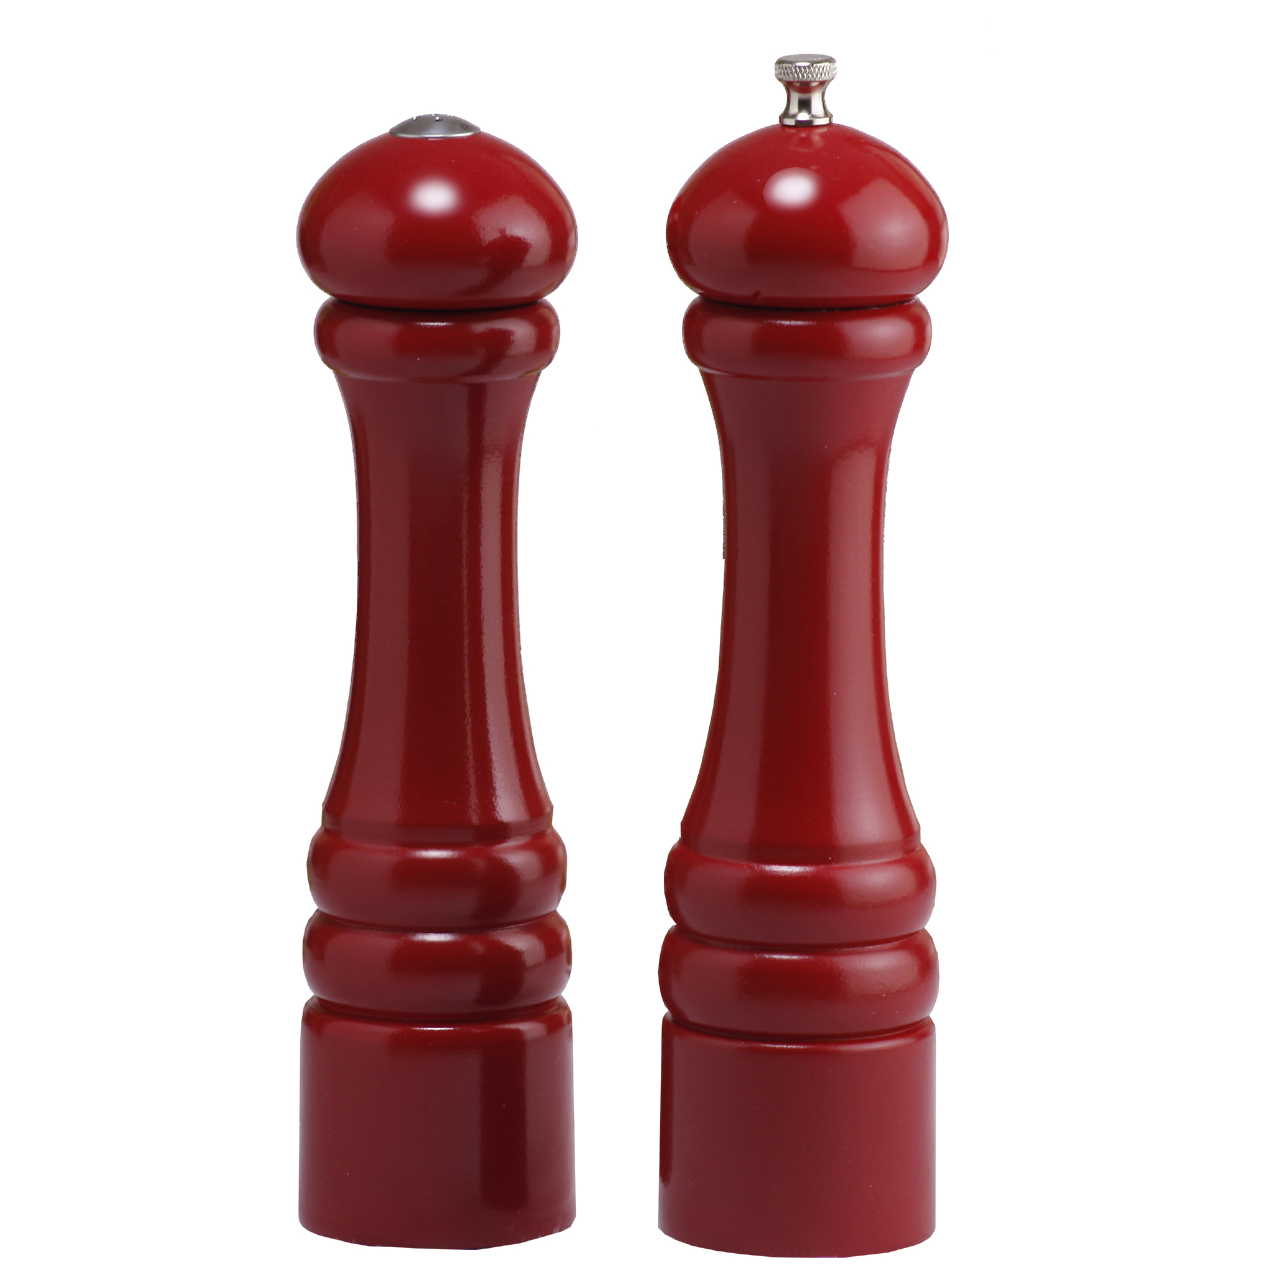 Picture of Chef Specialties - 10600 - Autumn Hues - 10 Inch - Pepper Mill and Salt Shaker Set - Candy Apple